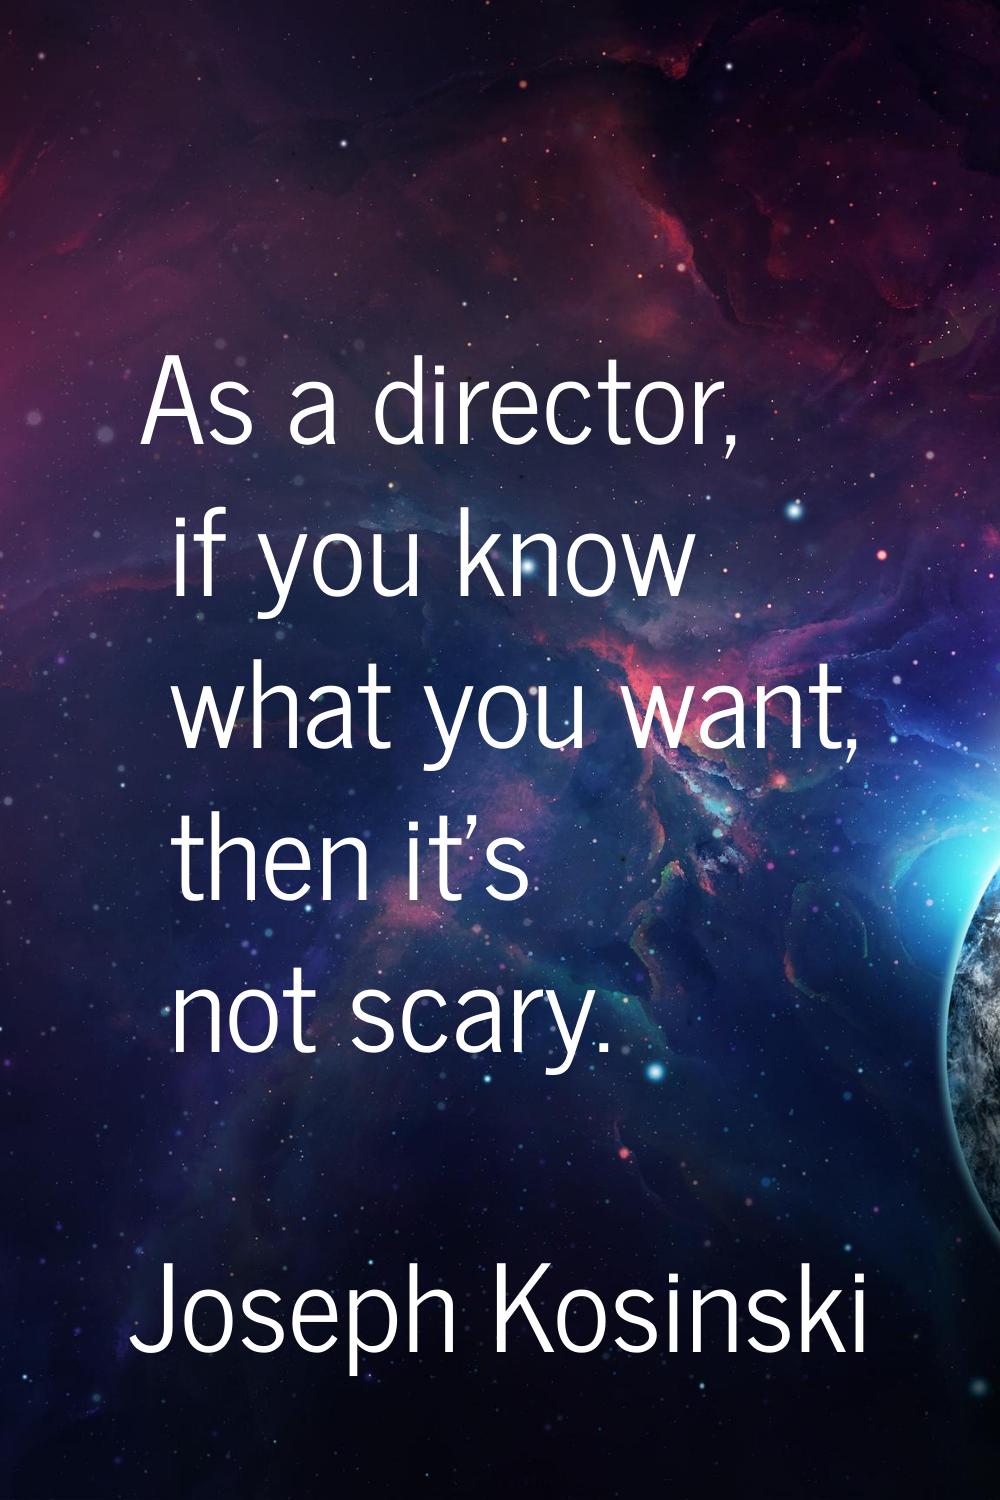 As a director, if you know what you want, then it's not scary.